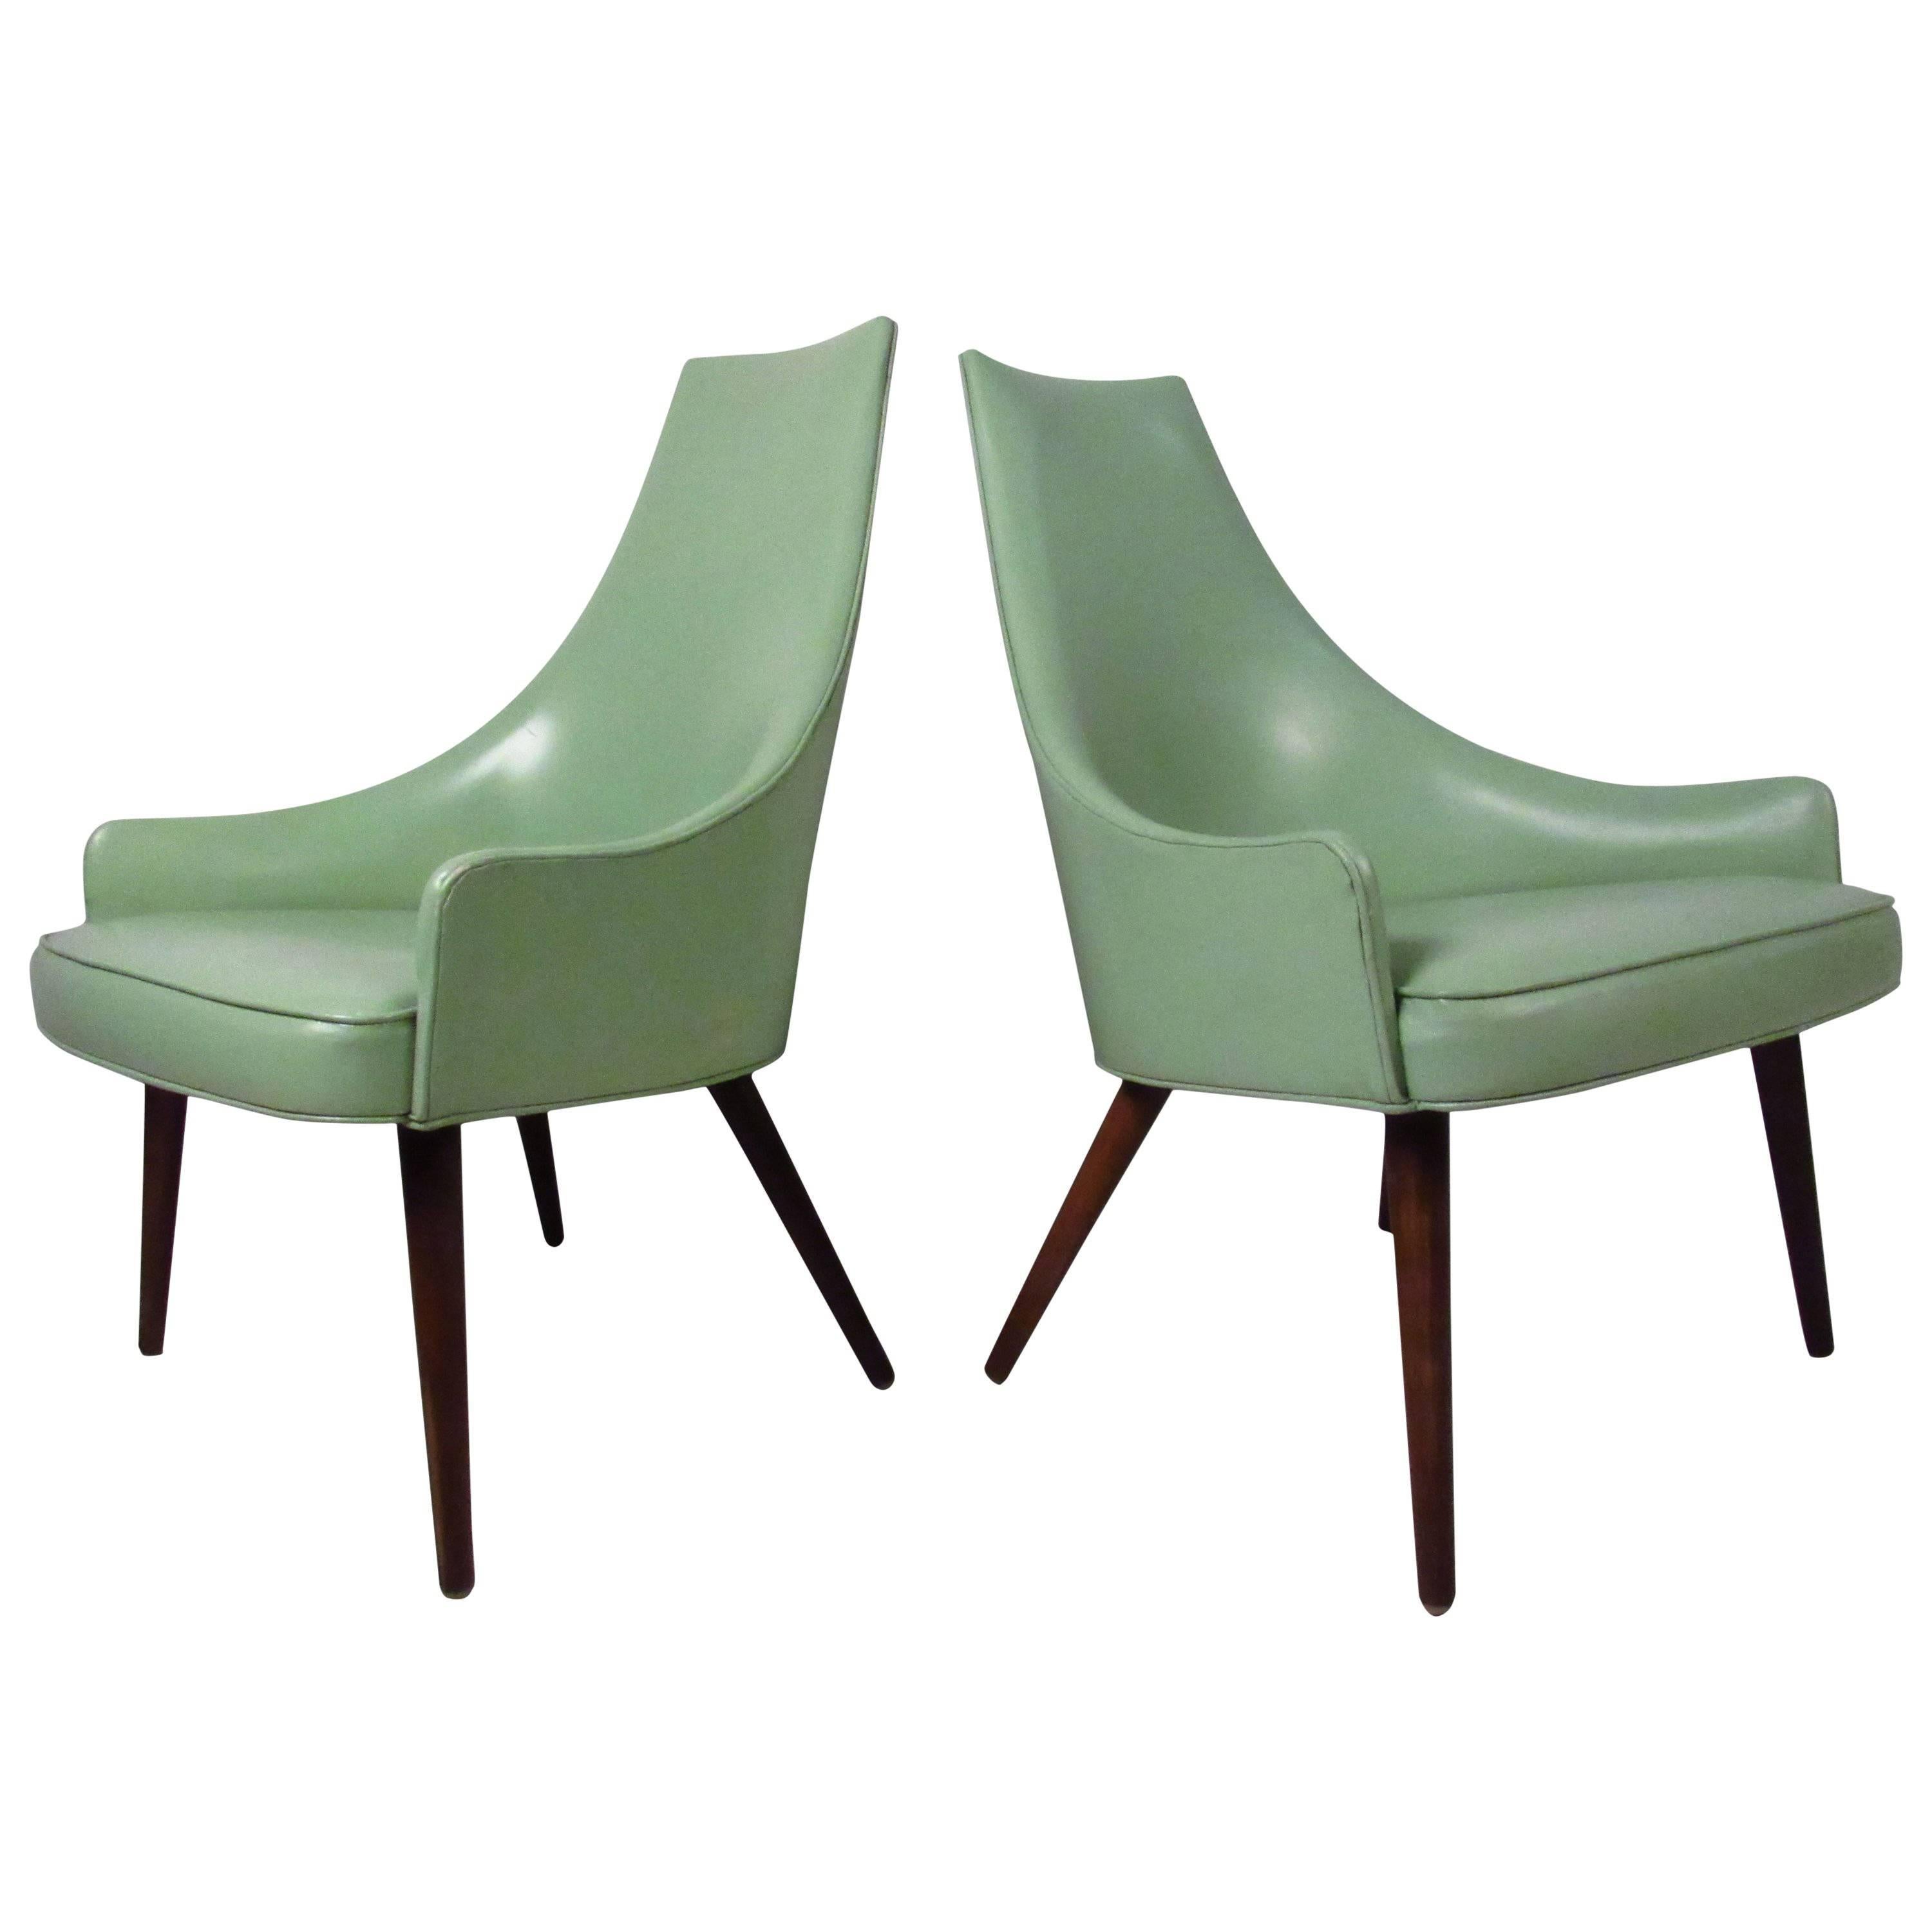 Pair of Mid-Century High Back Vinyl Chairs